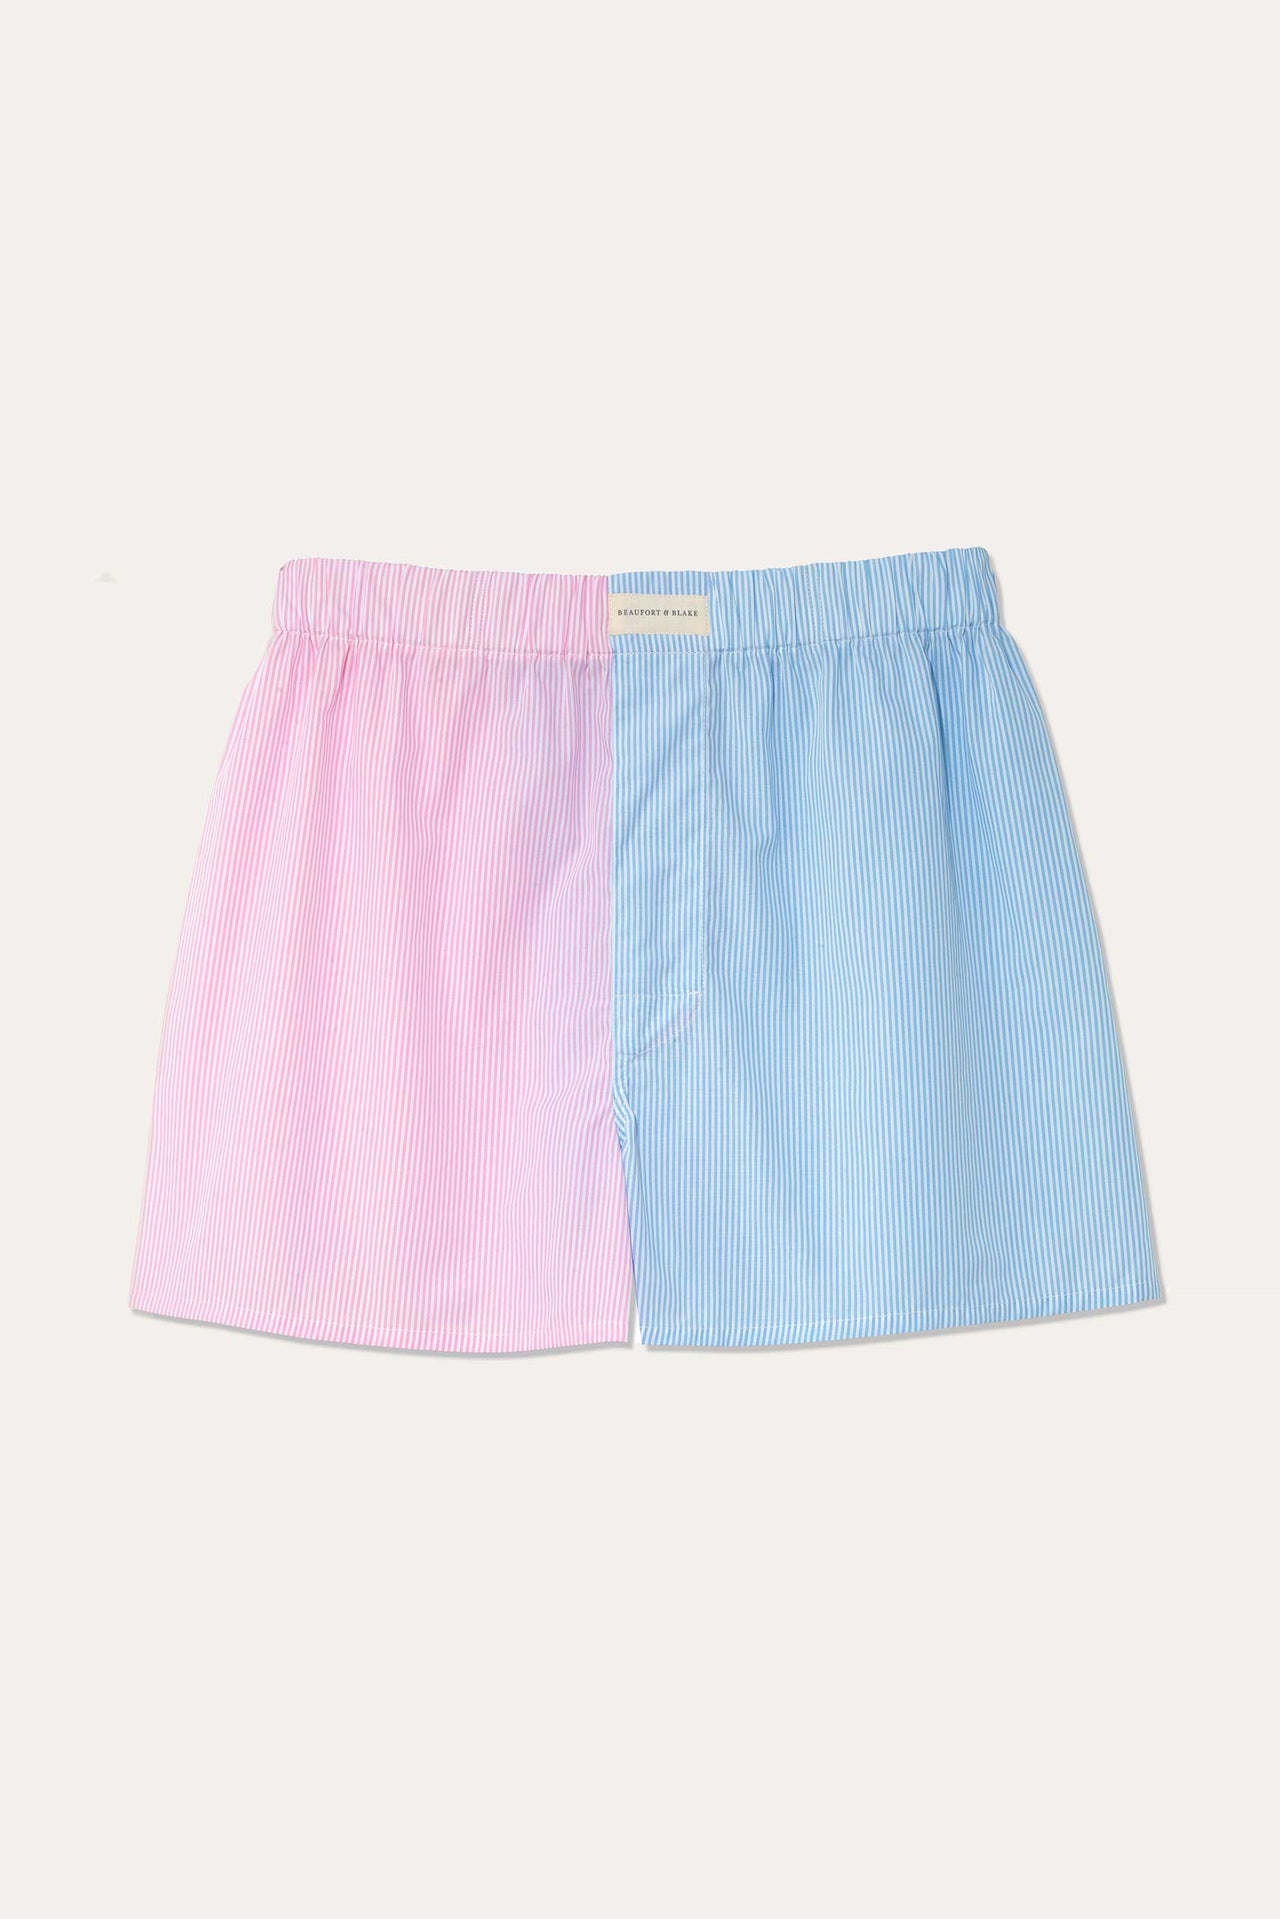 Fine stripe pink and blue colour block poplin boxers. Elasticated waistband and extra rear seat panel for added comfort. Made in Portugal. Machine Wash. Underwear. Size S, M, L, XL, XXL.